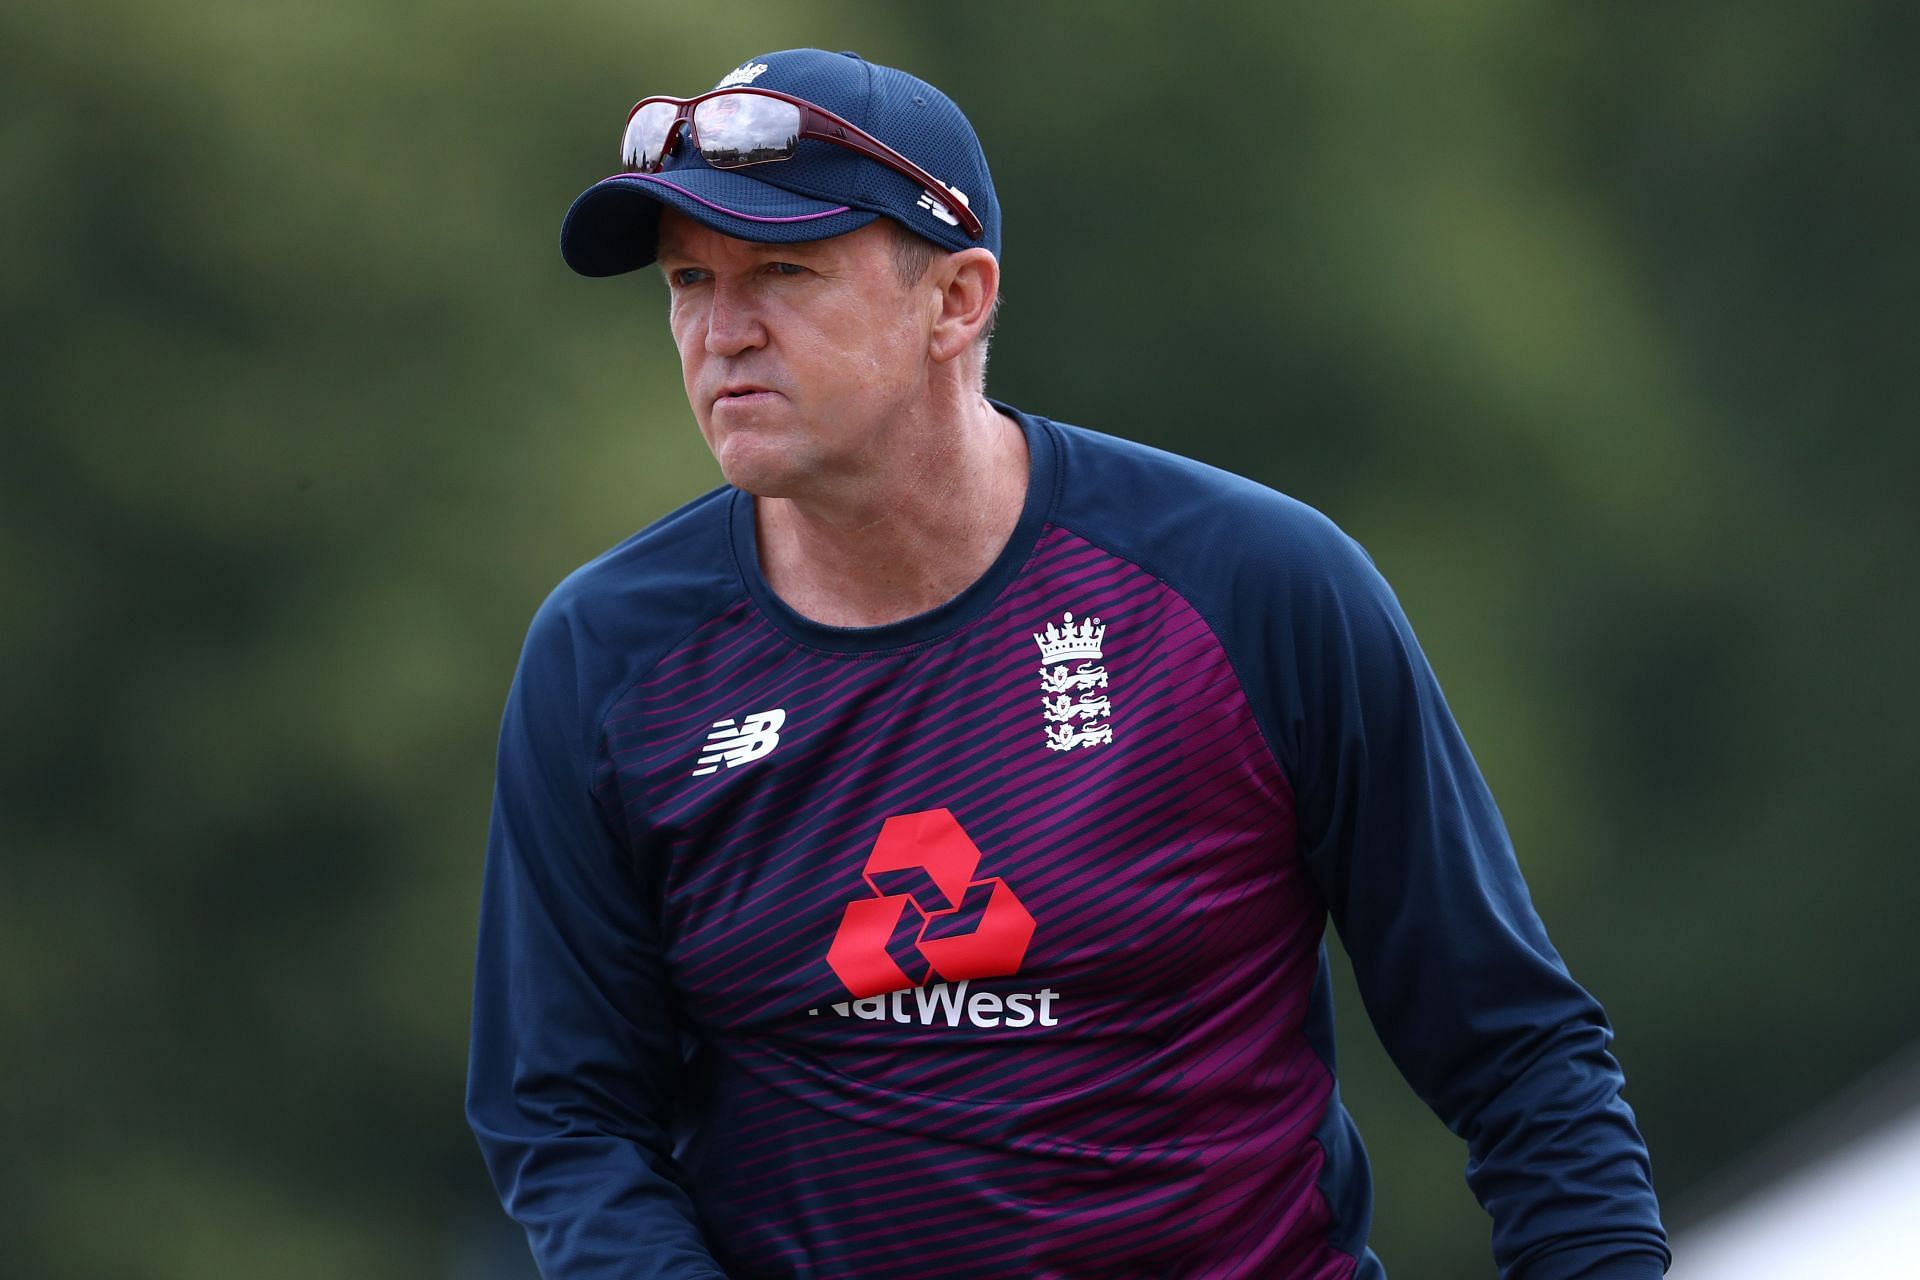 Aakash Chopra highlighted that Andy Flower is a renowned coach